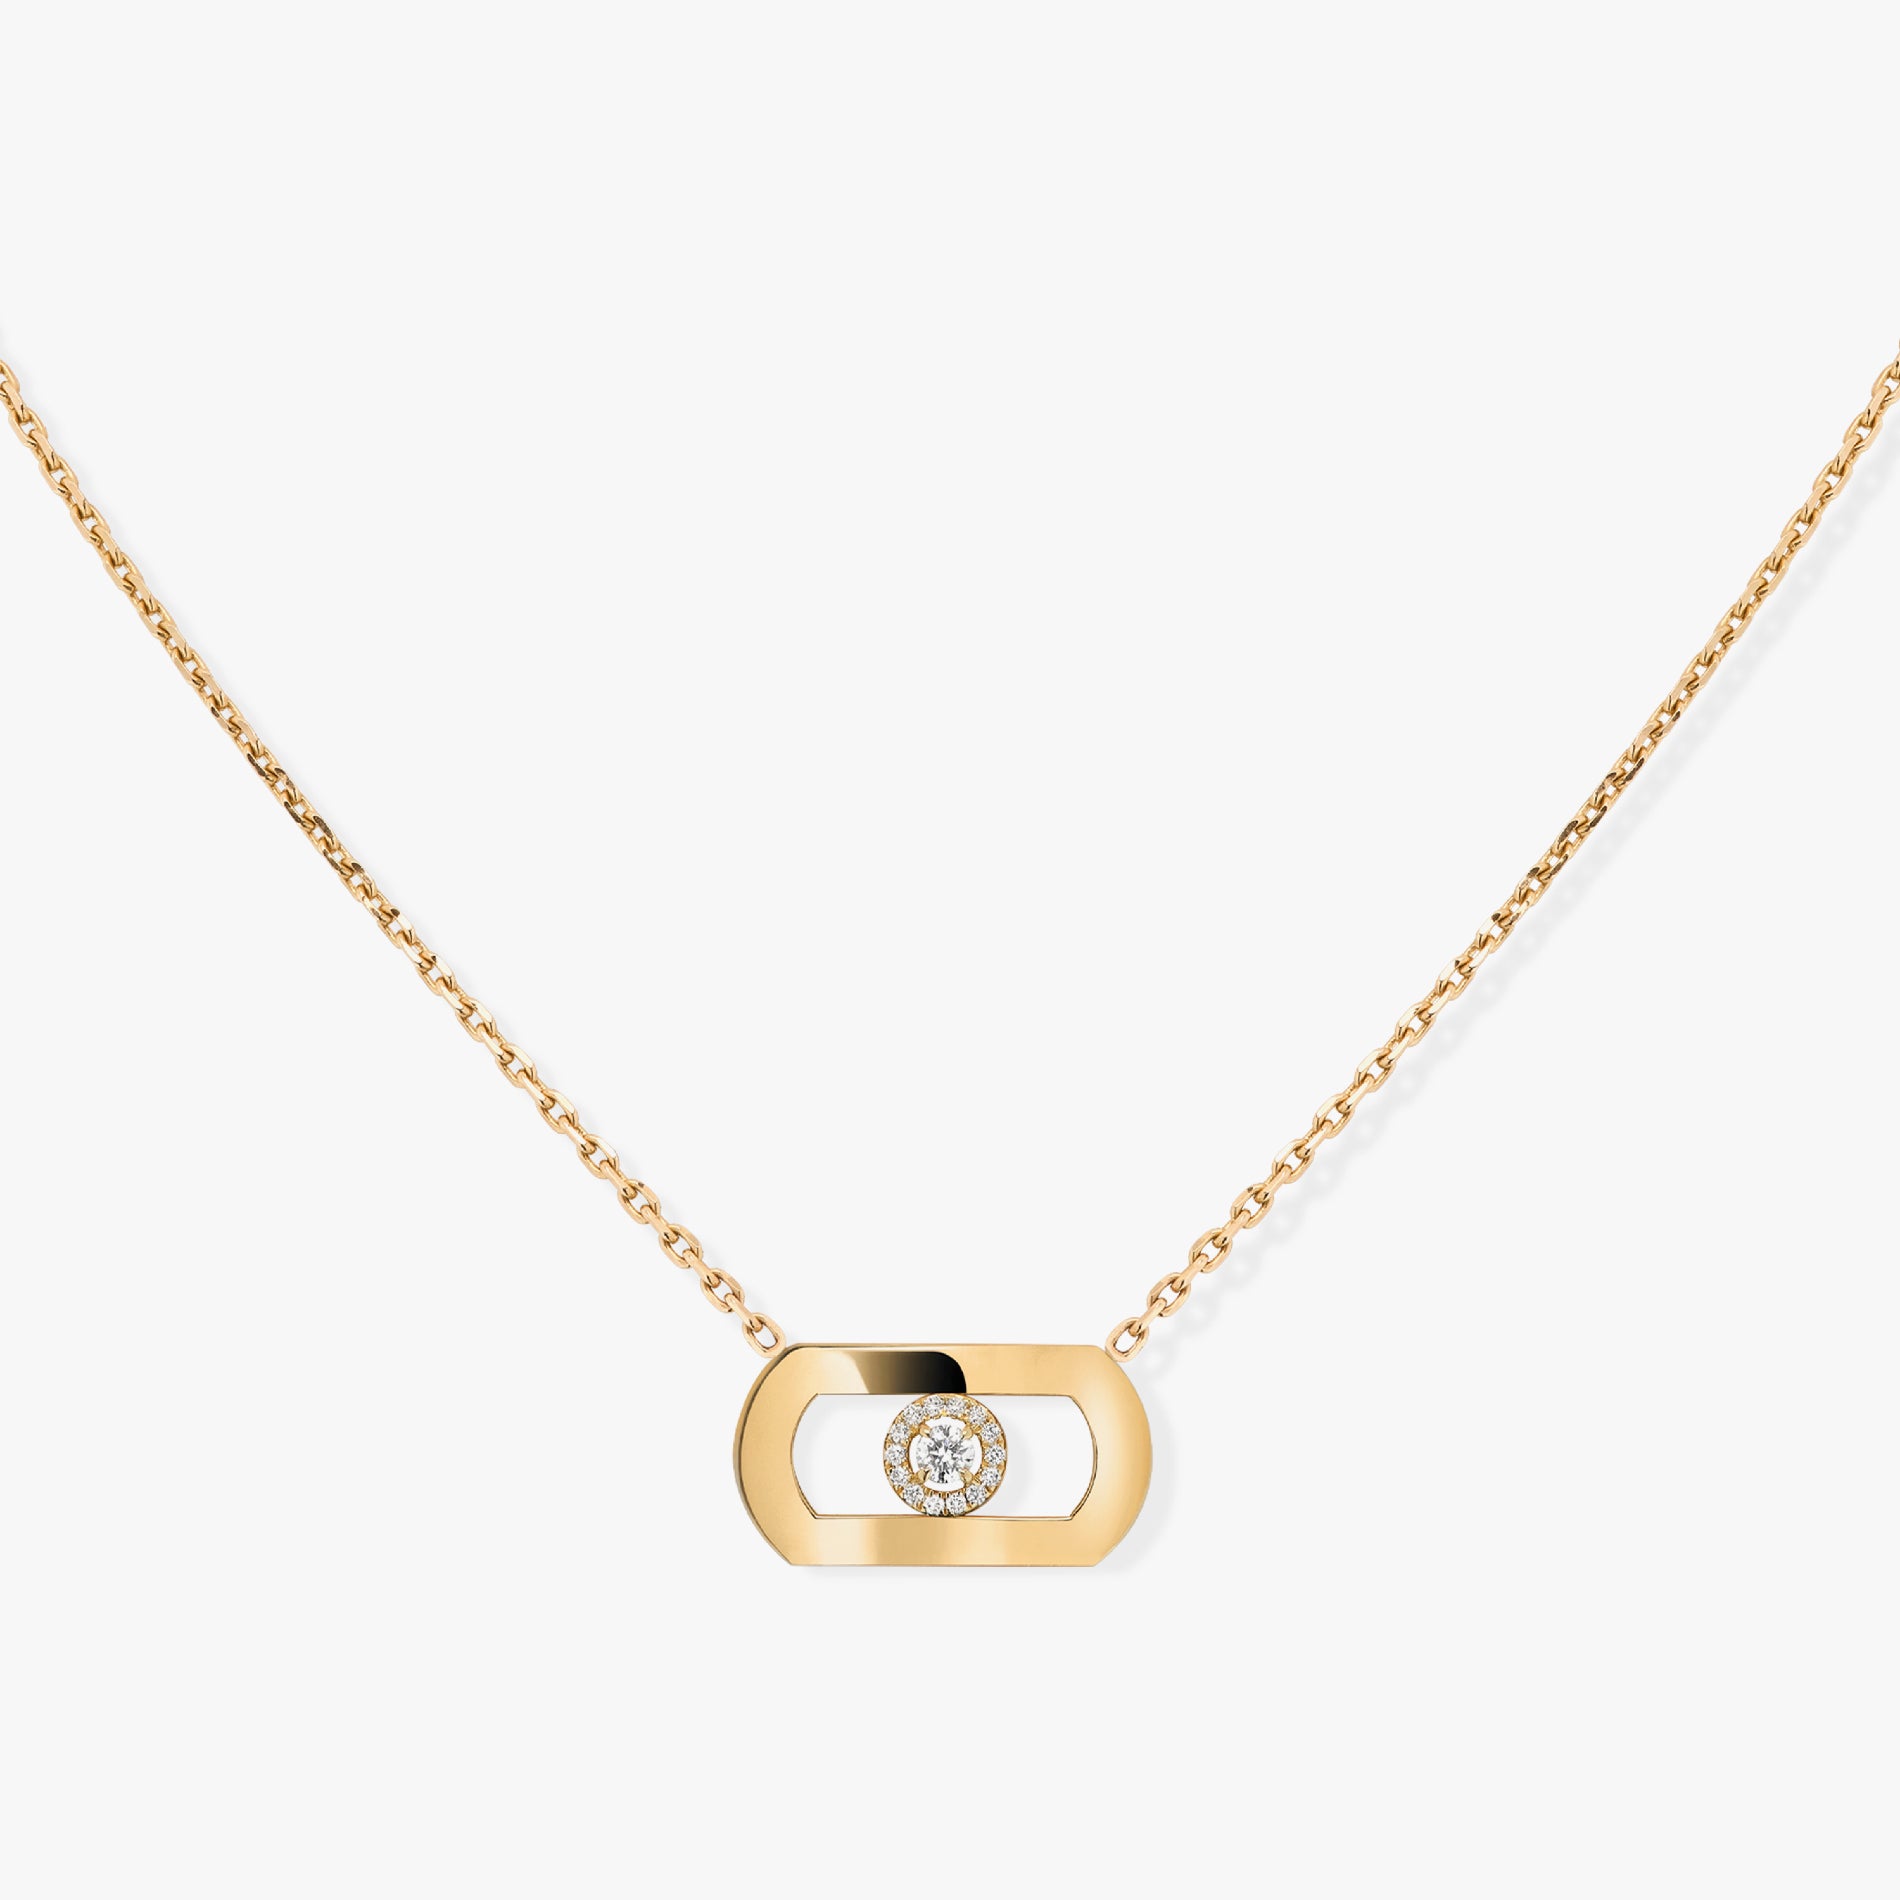 MESSIKA YELLOW GOLD DIAMOND NECKLACE SO MOVE